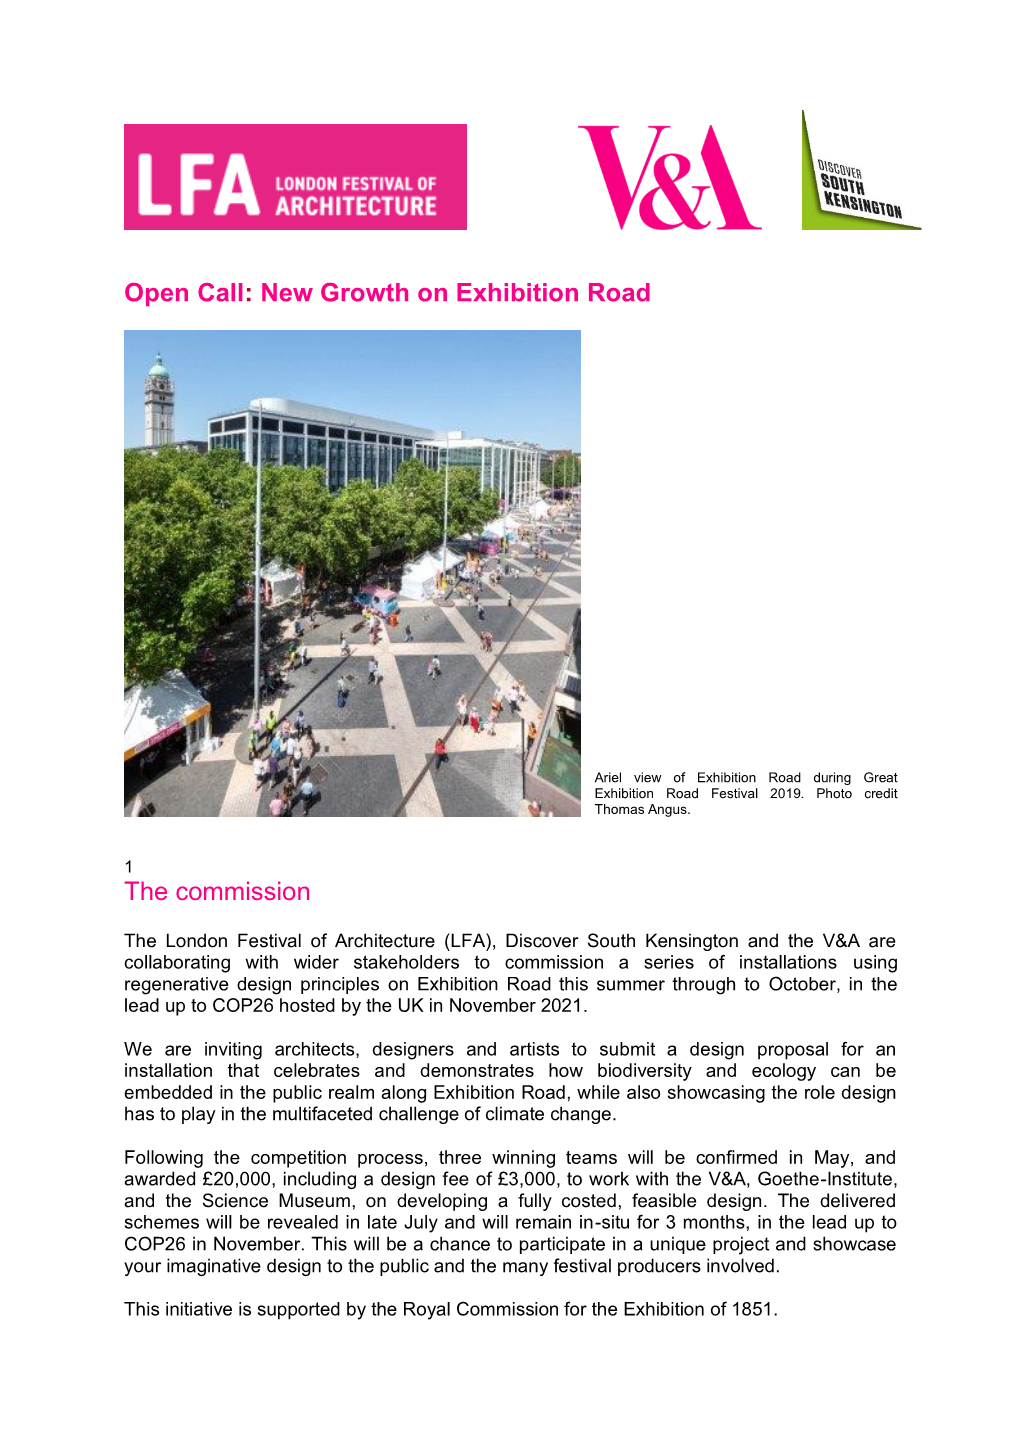 Open Call: New Growth on Exhibition Road the Commission